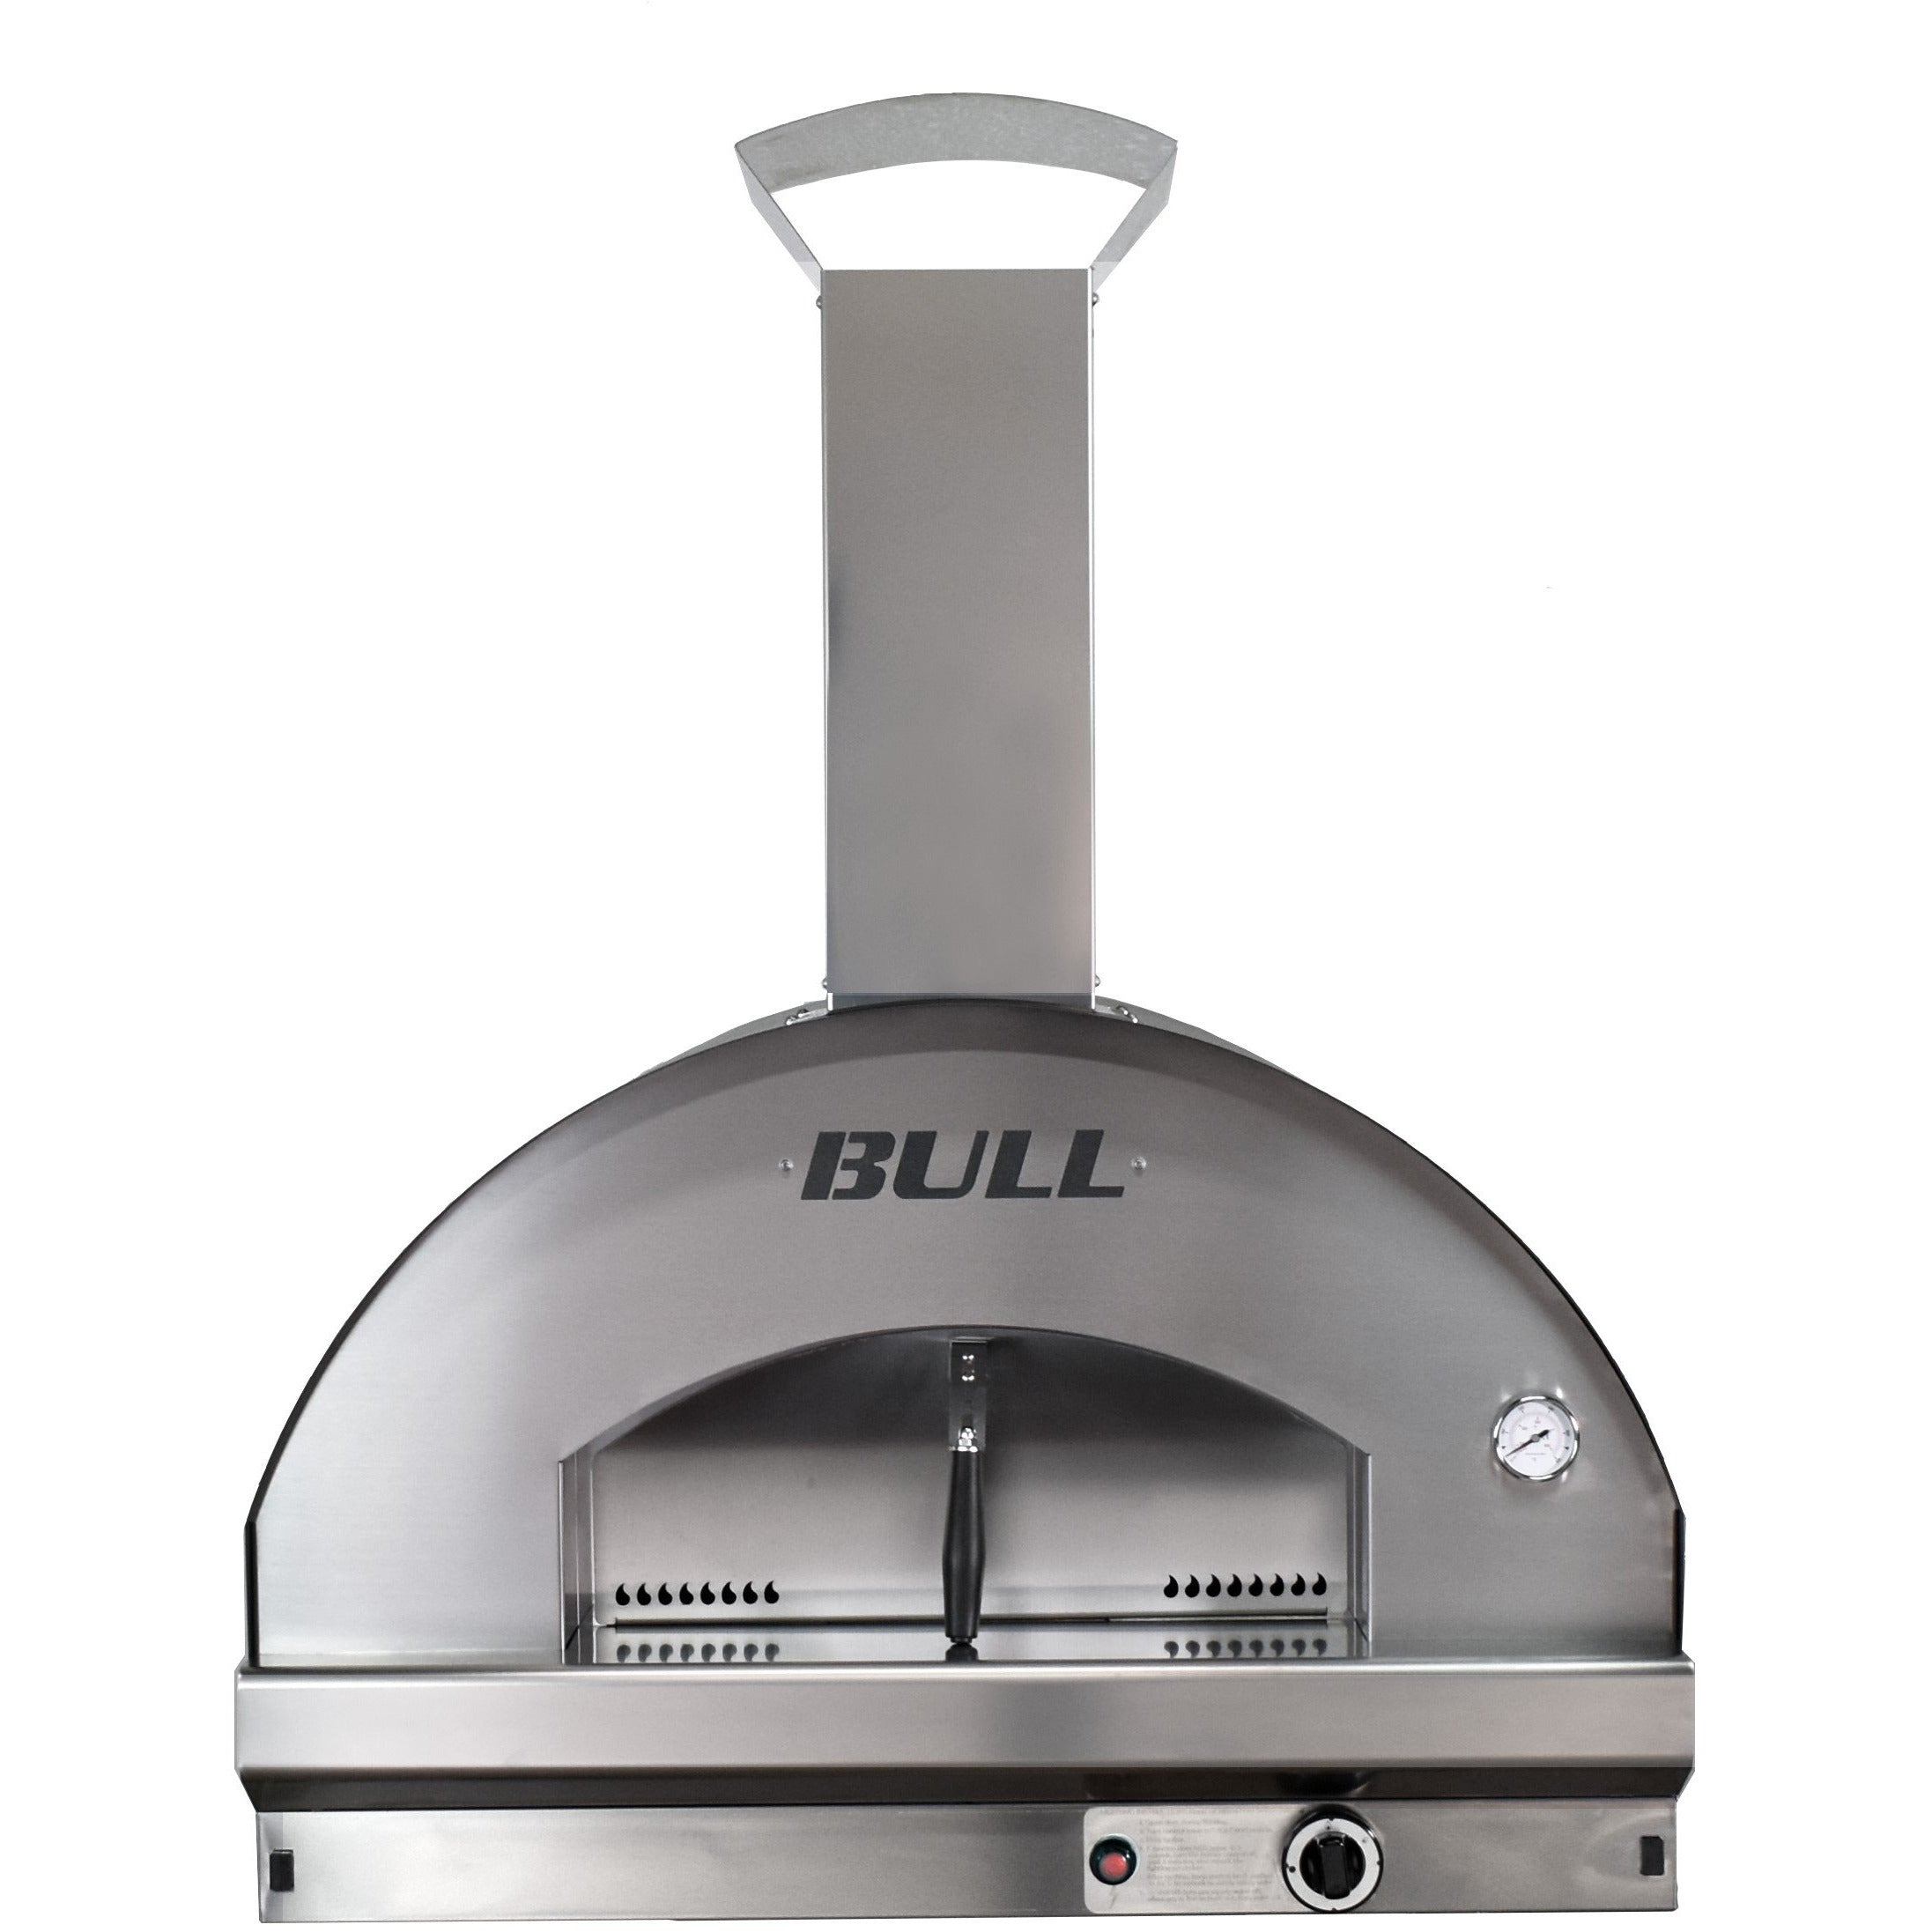 Bull Gas Fired Outdoor Pizza Oven